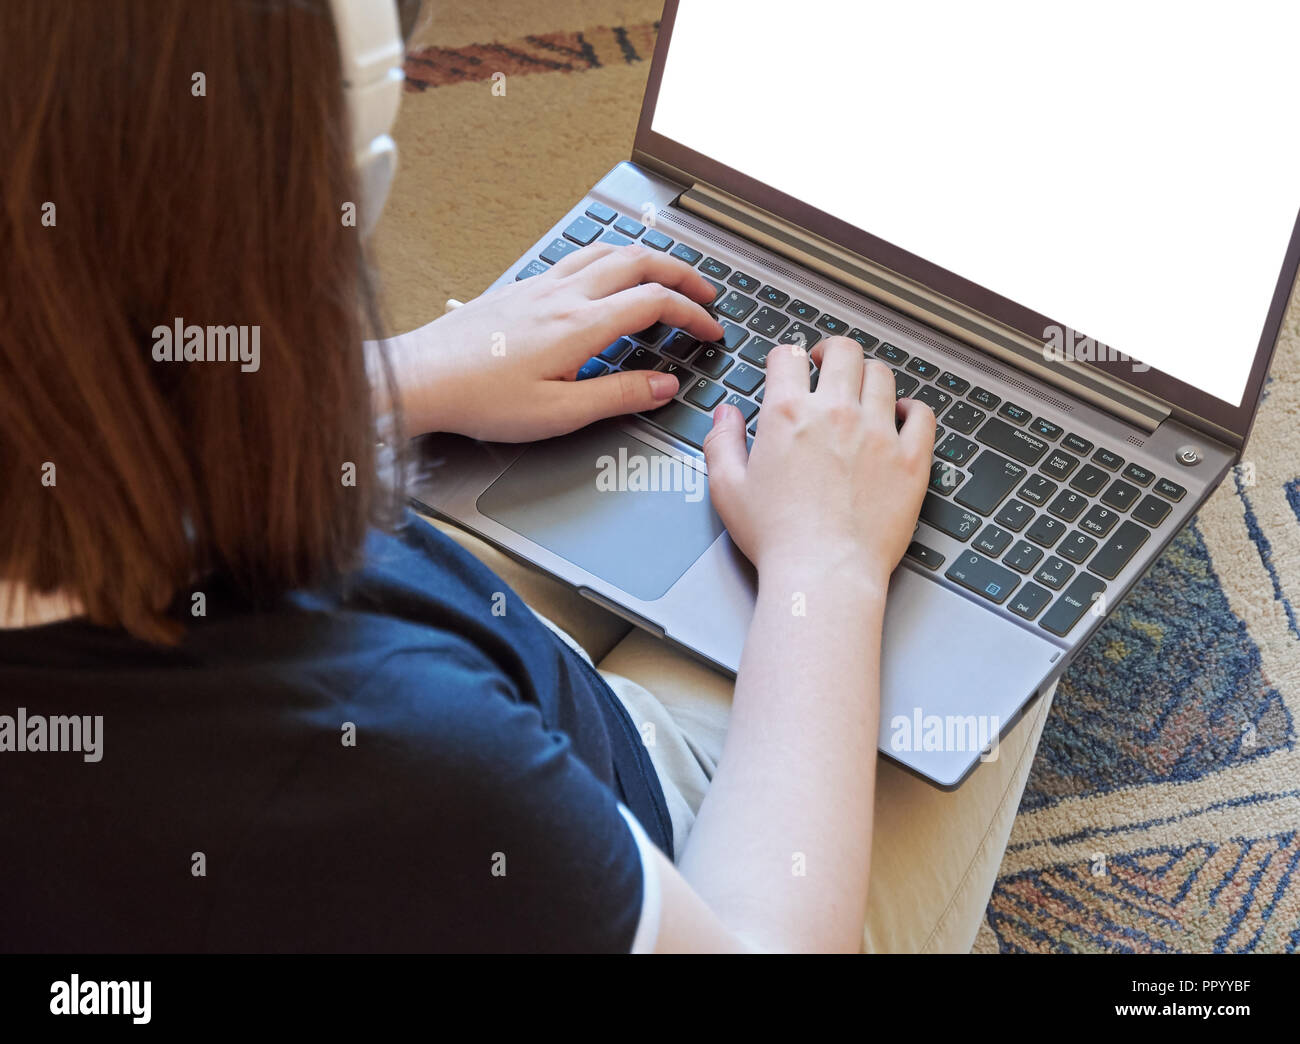 Young woman with laptop on her lap, writes on keyboard and looking at white display, with headphones. Sits on the floor on the carpet Stock Photo